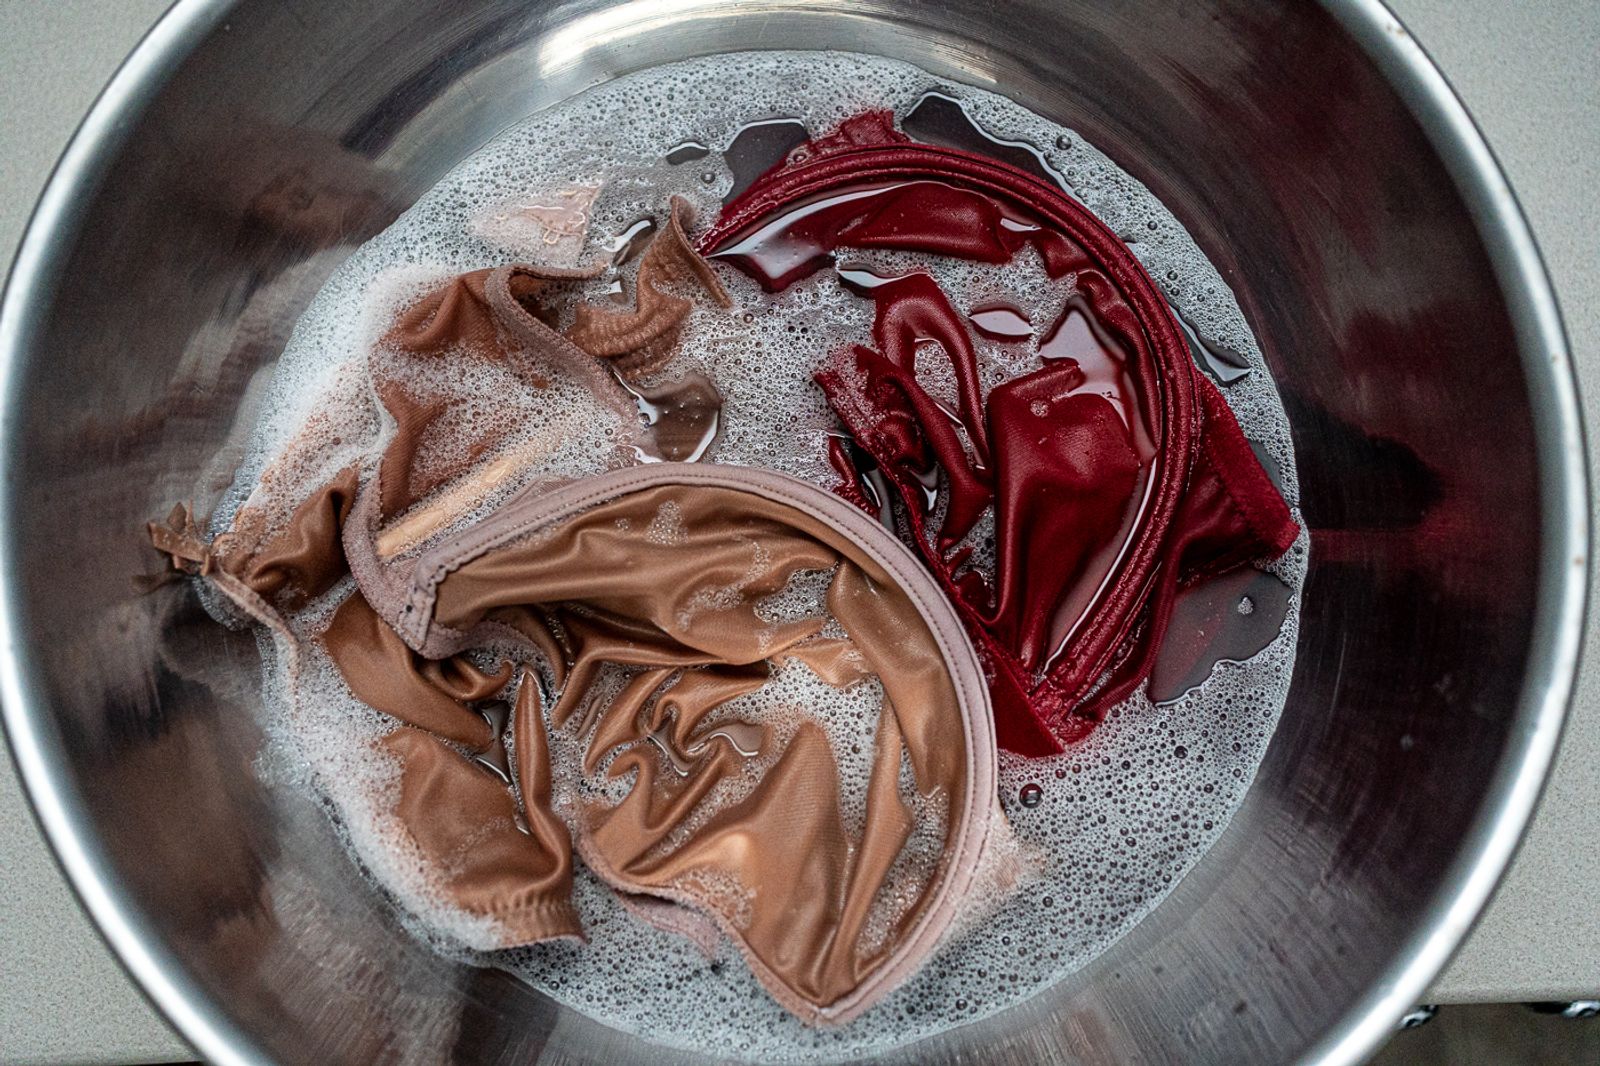 © Bobbi Barbarich - She carefully hand washes her bras so she can donate them later to women in need.